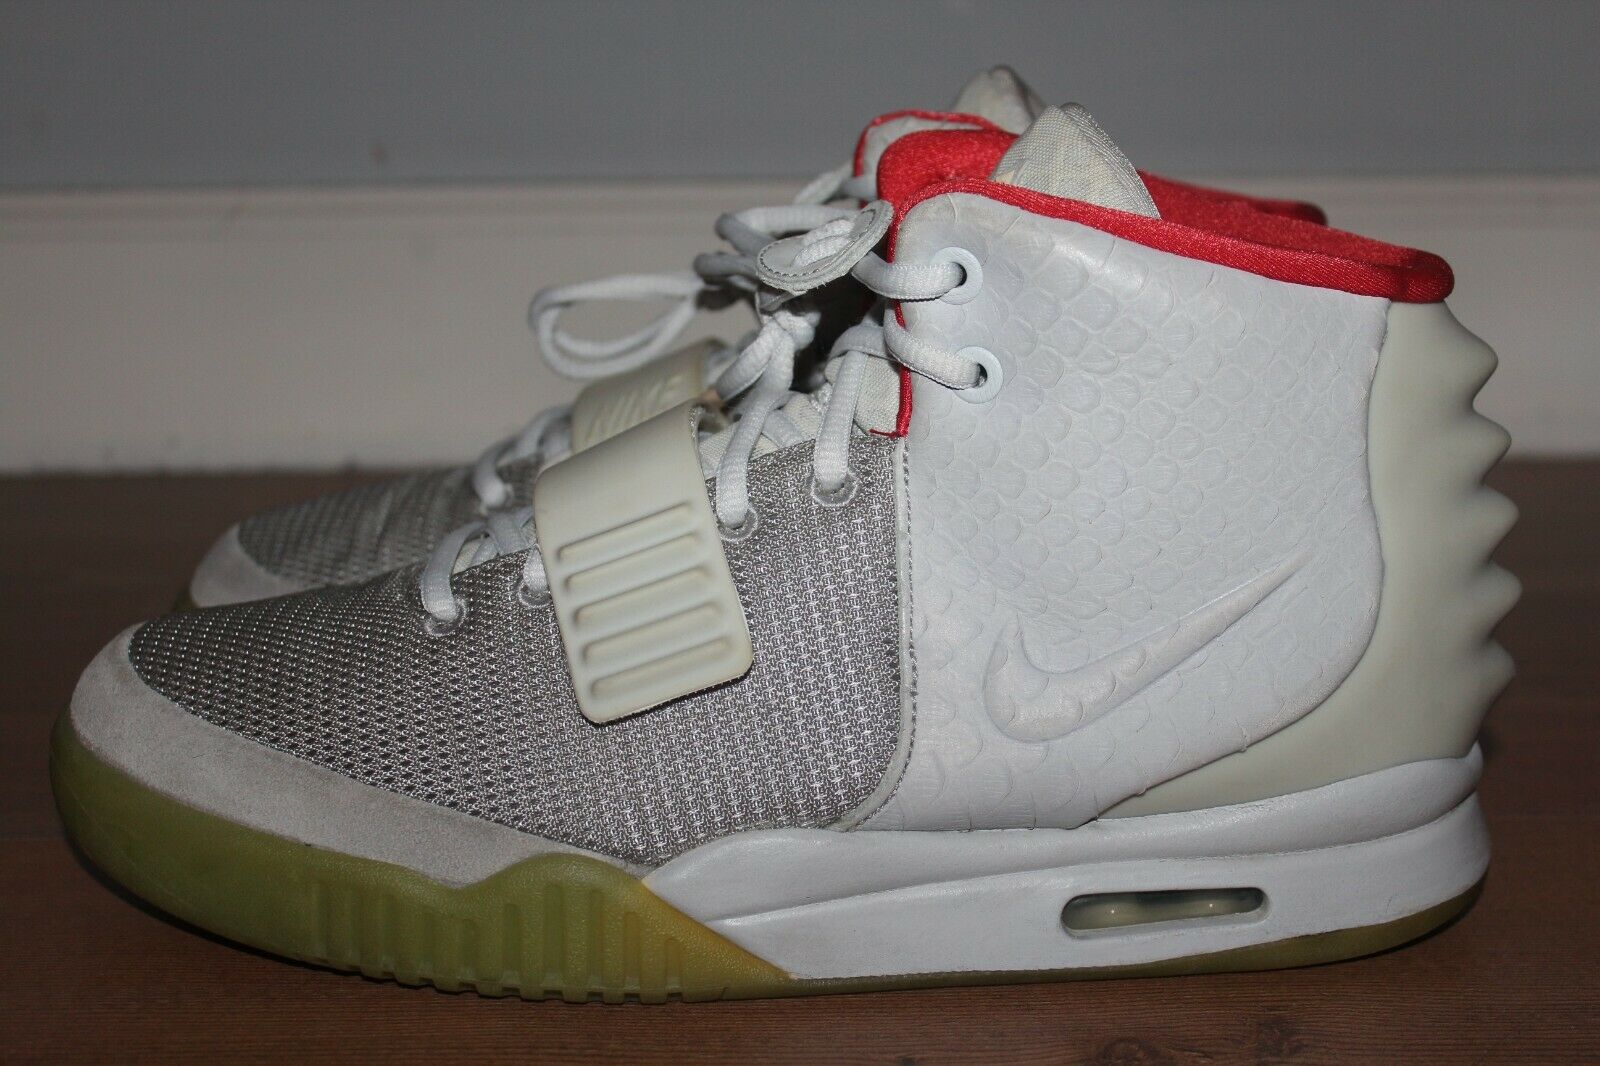 Nike Air Yeezy 2 NRG Pure Platinum Size 10 Authentic 508214-010